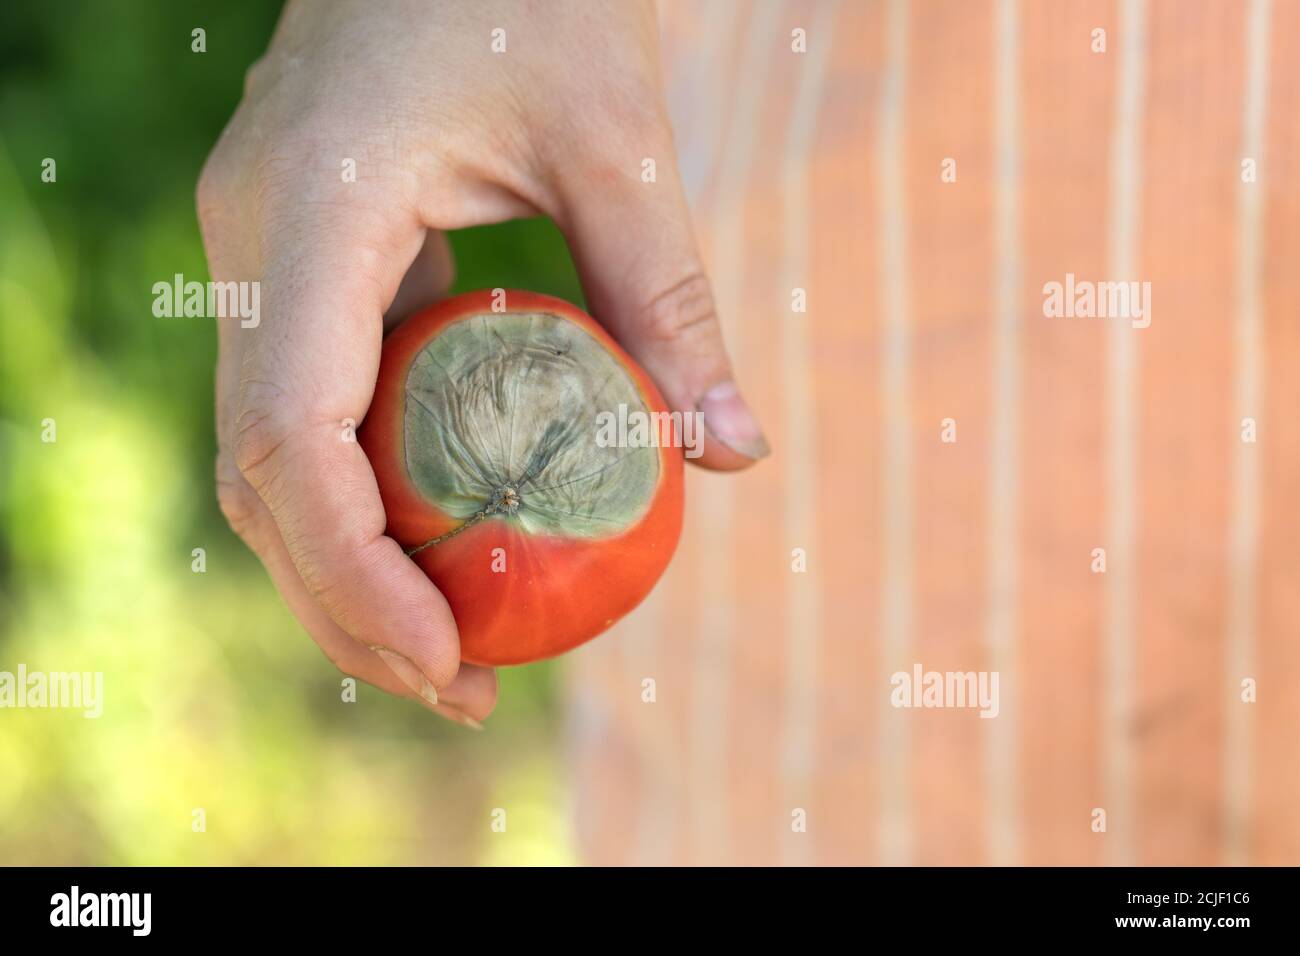 ripe red tomato with spoiled top of light green rot in hand Stock Photo